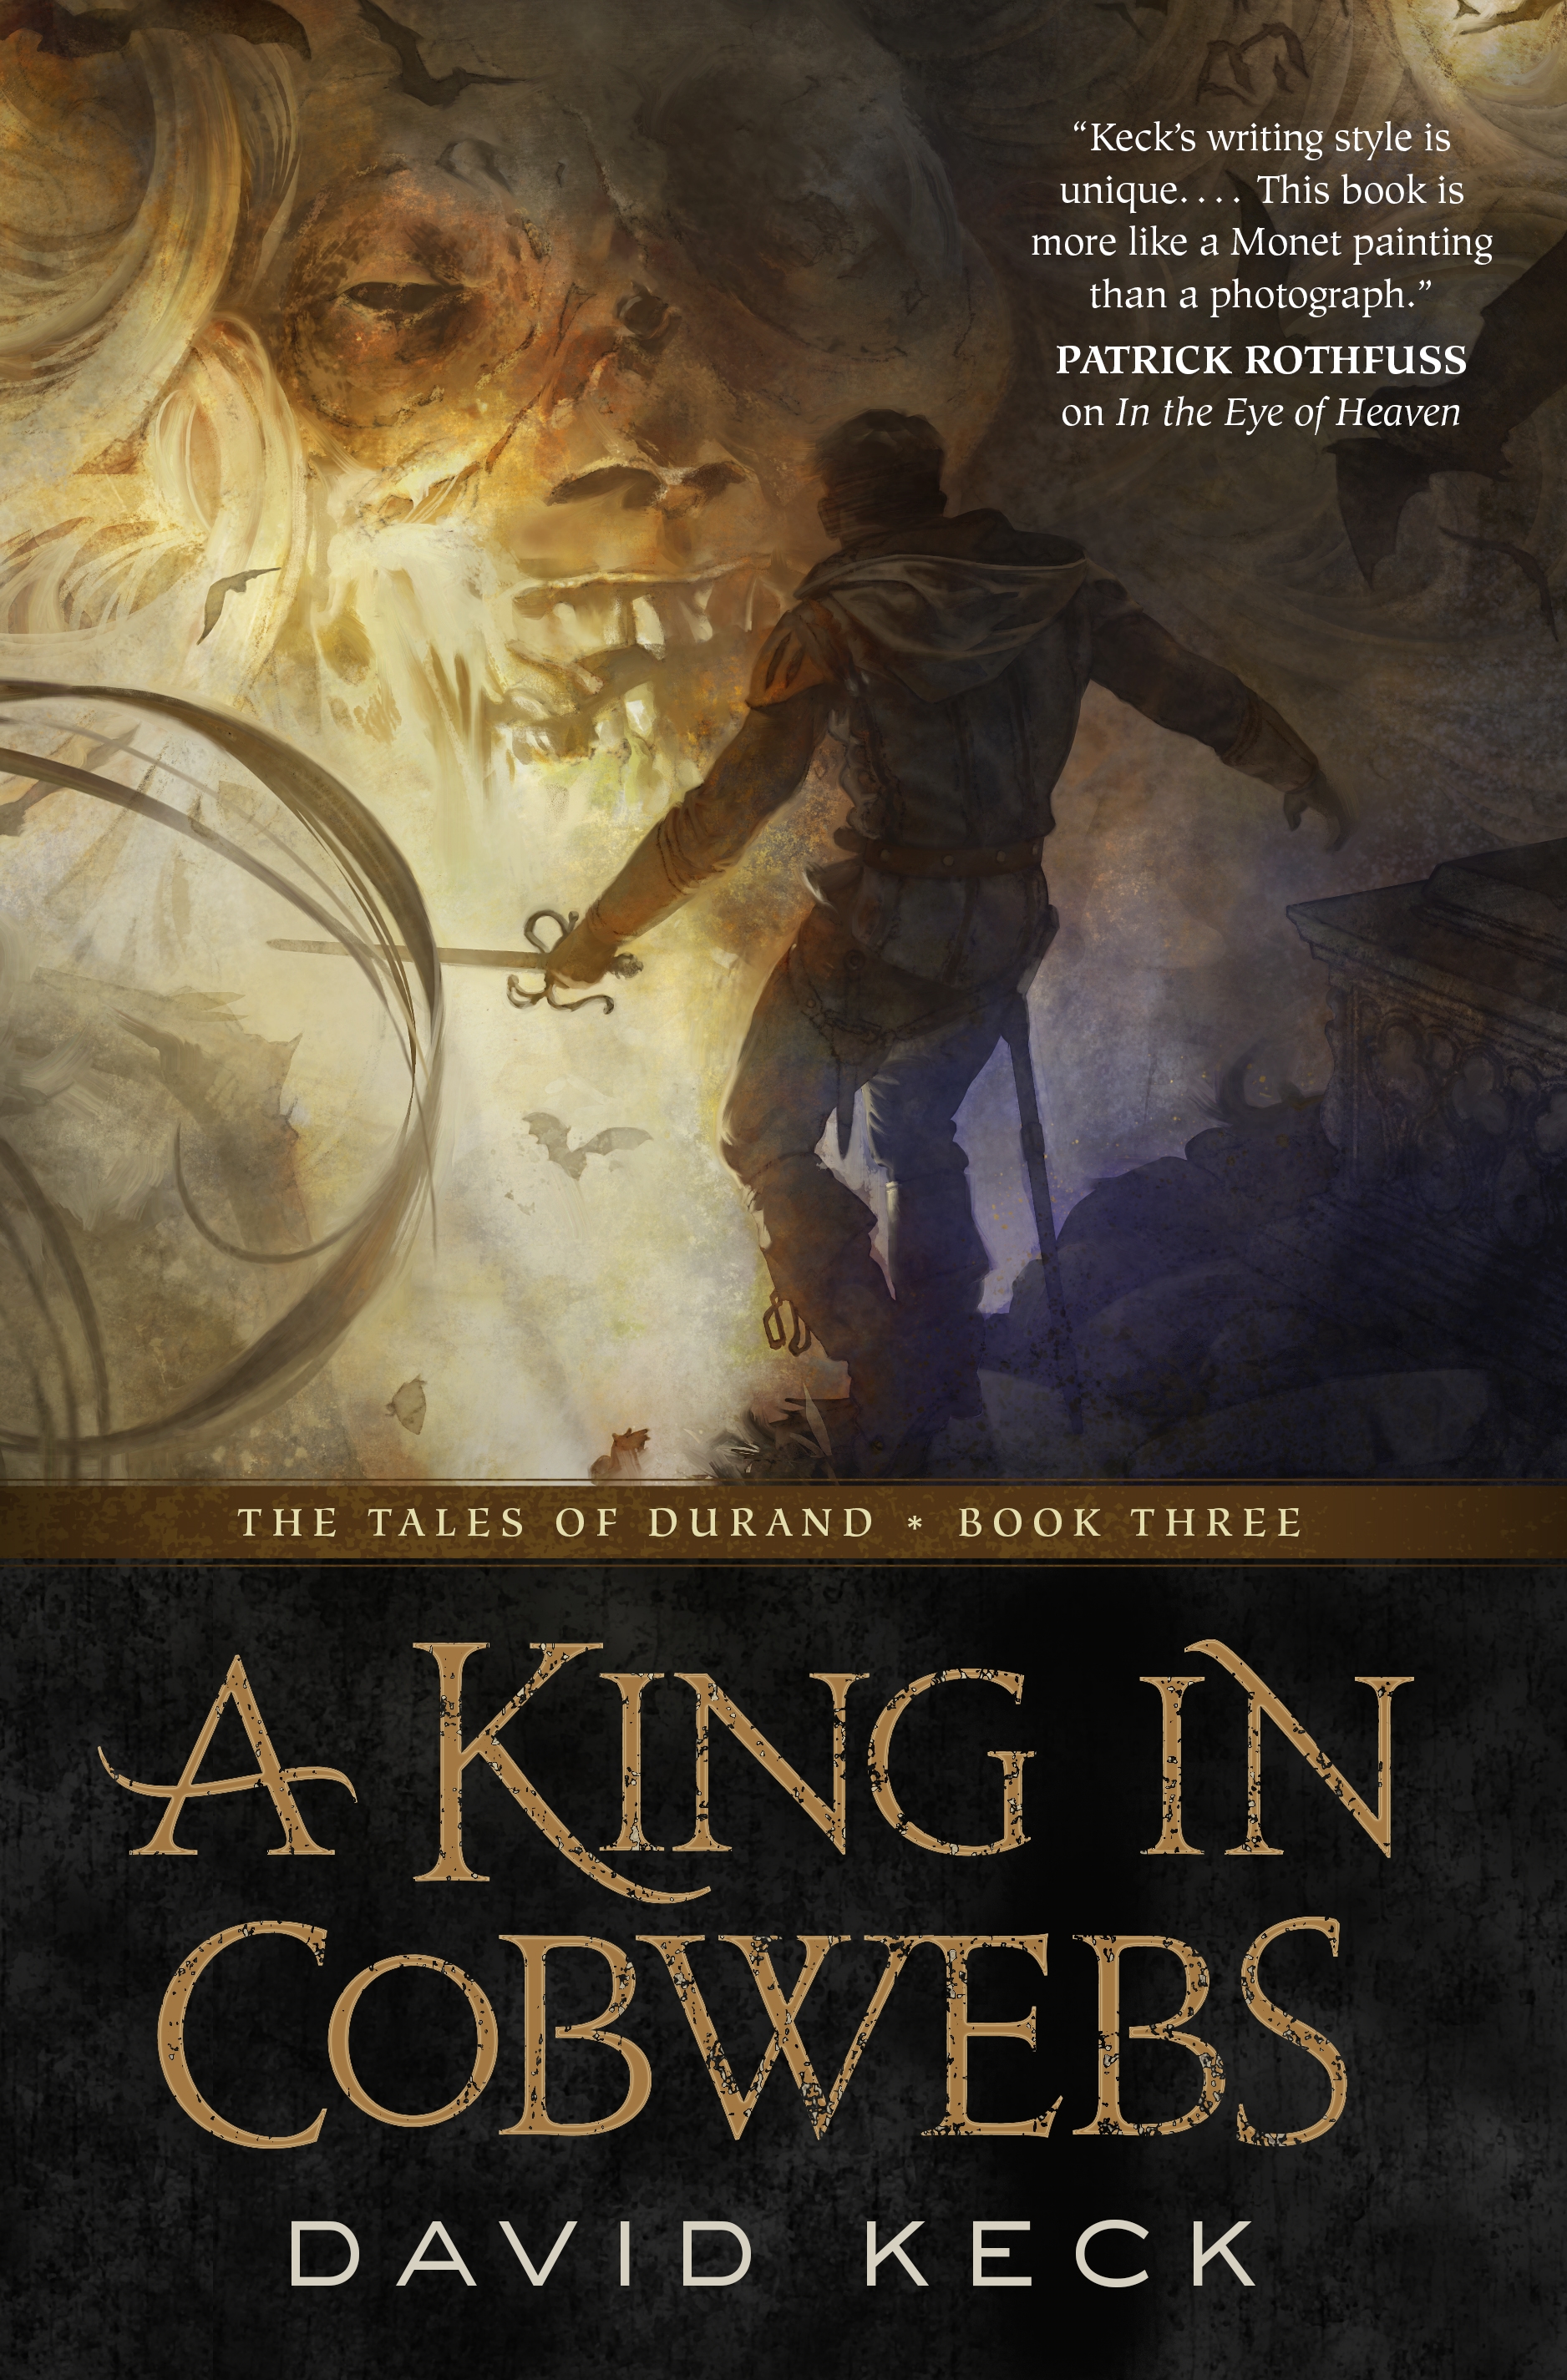 A King in Cobwebs : The Tales of Durand, Book Three by David Keck